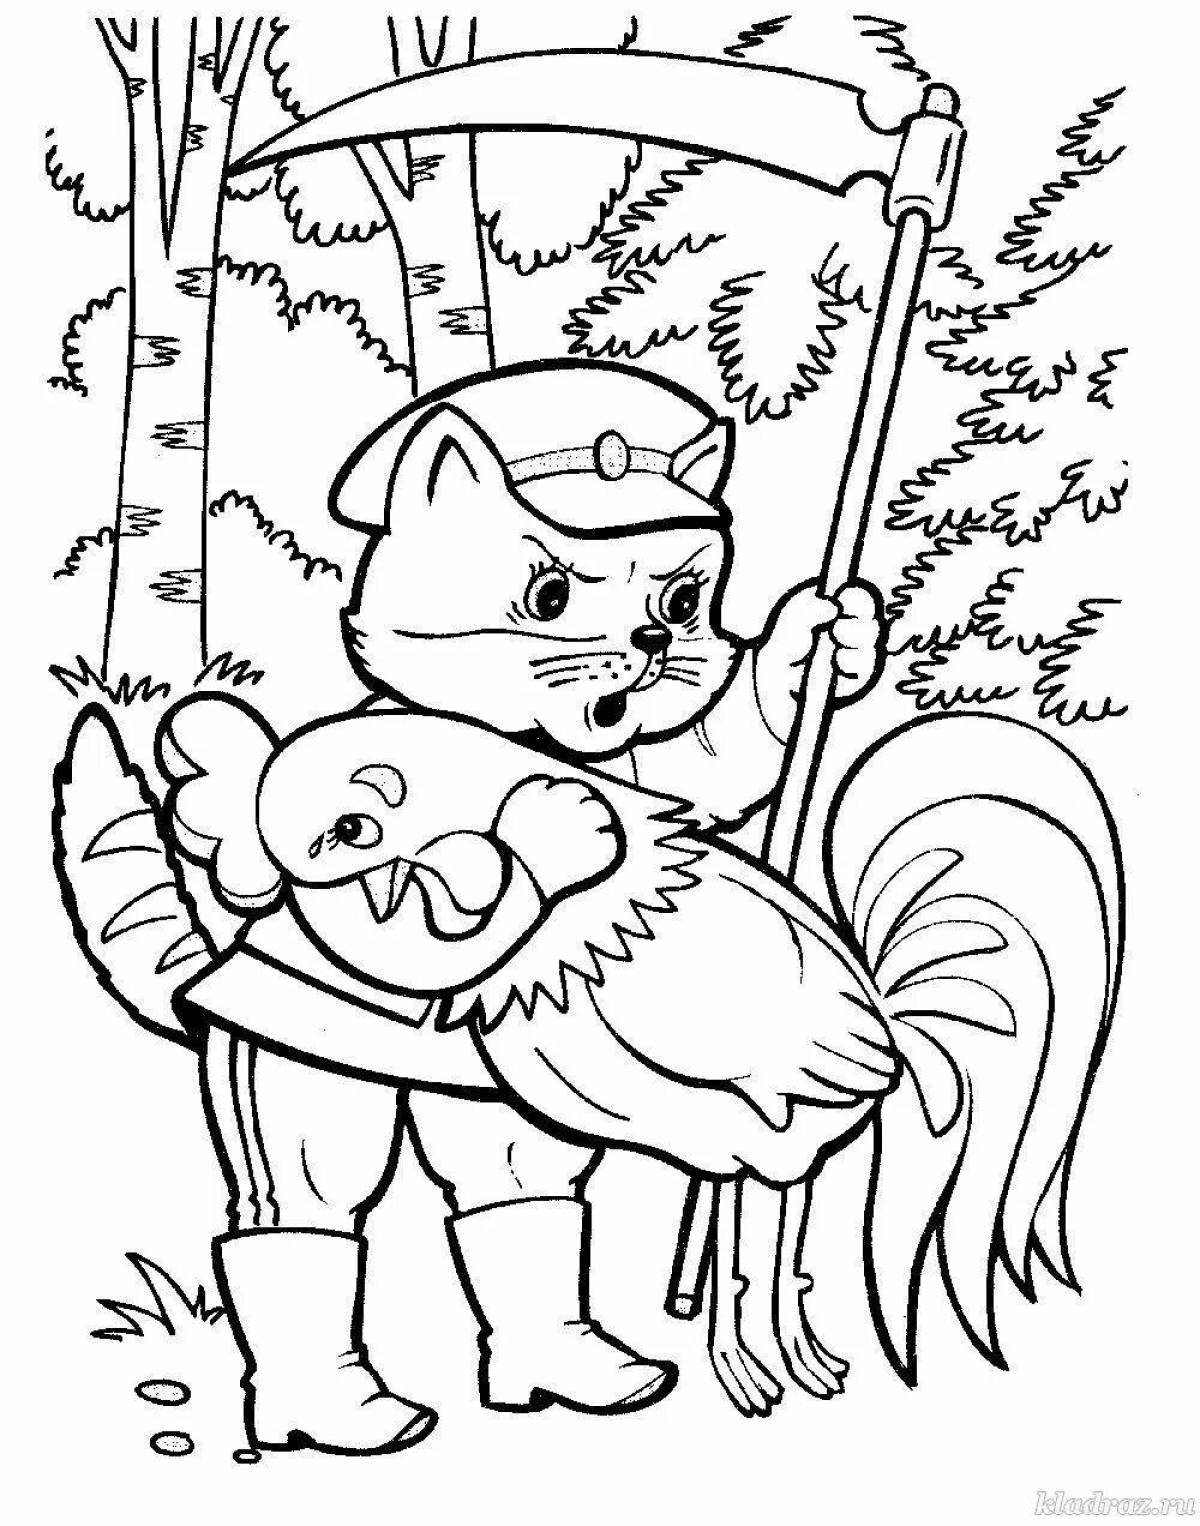 Coloring page energetic rooster